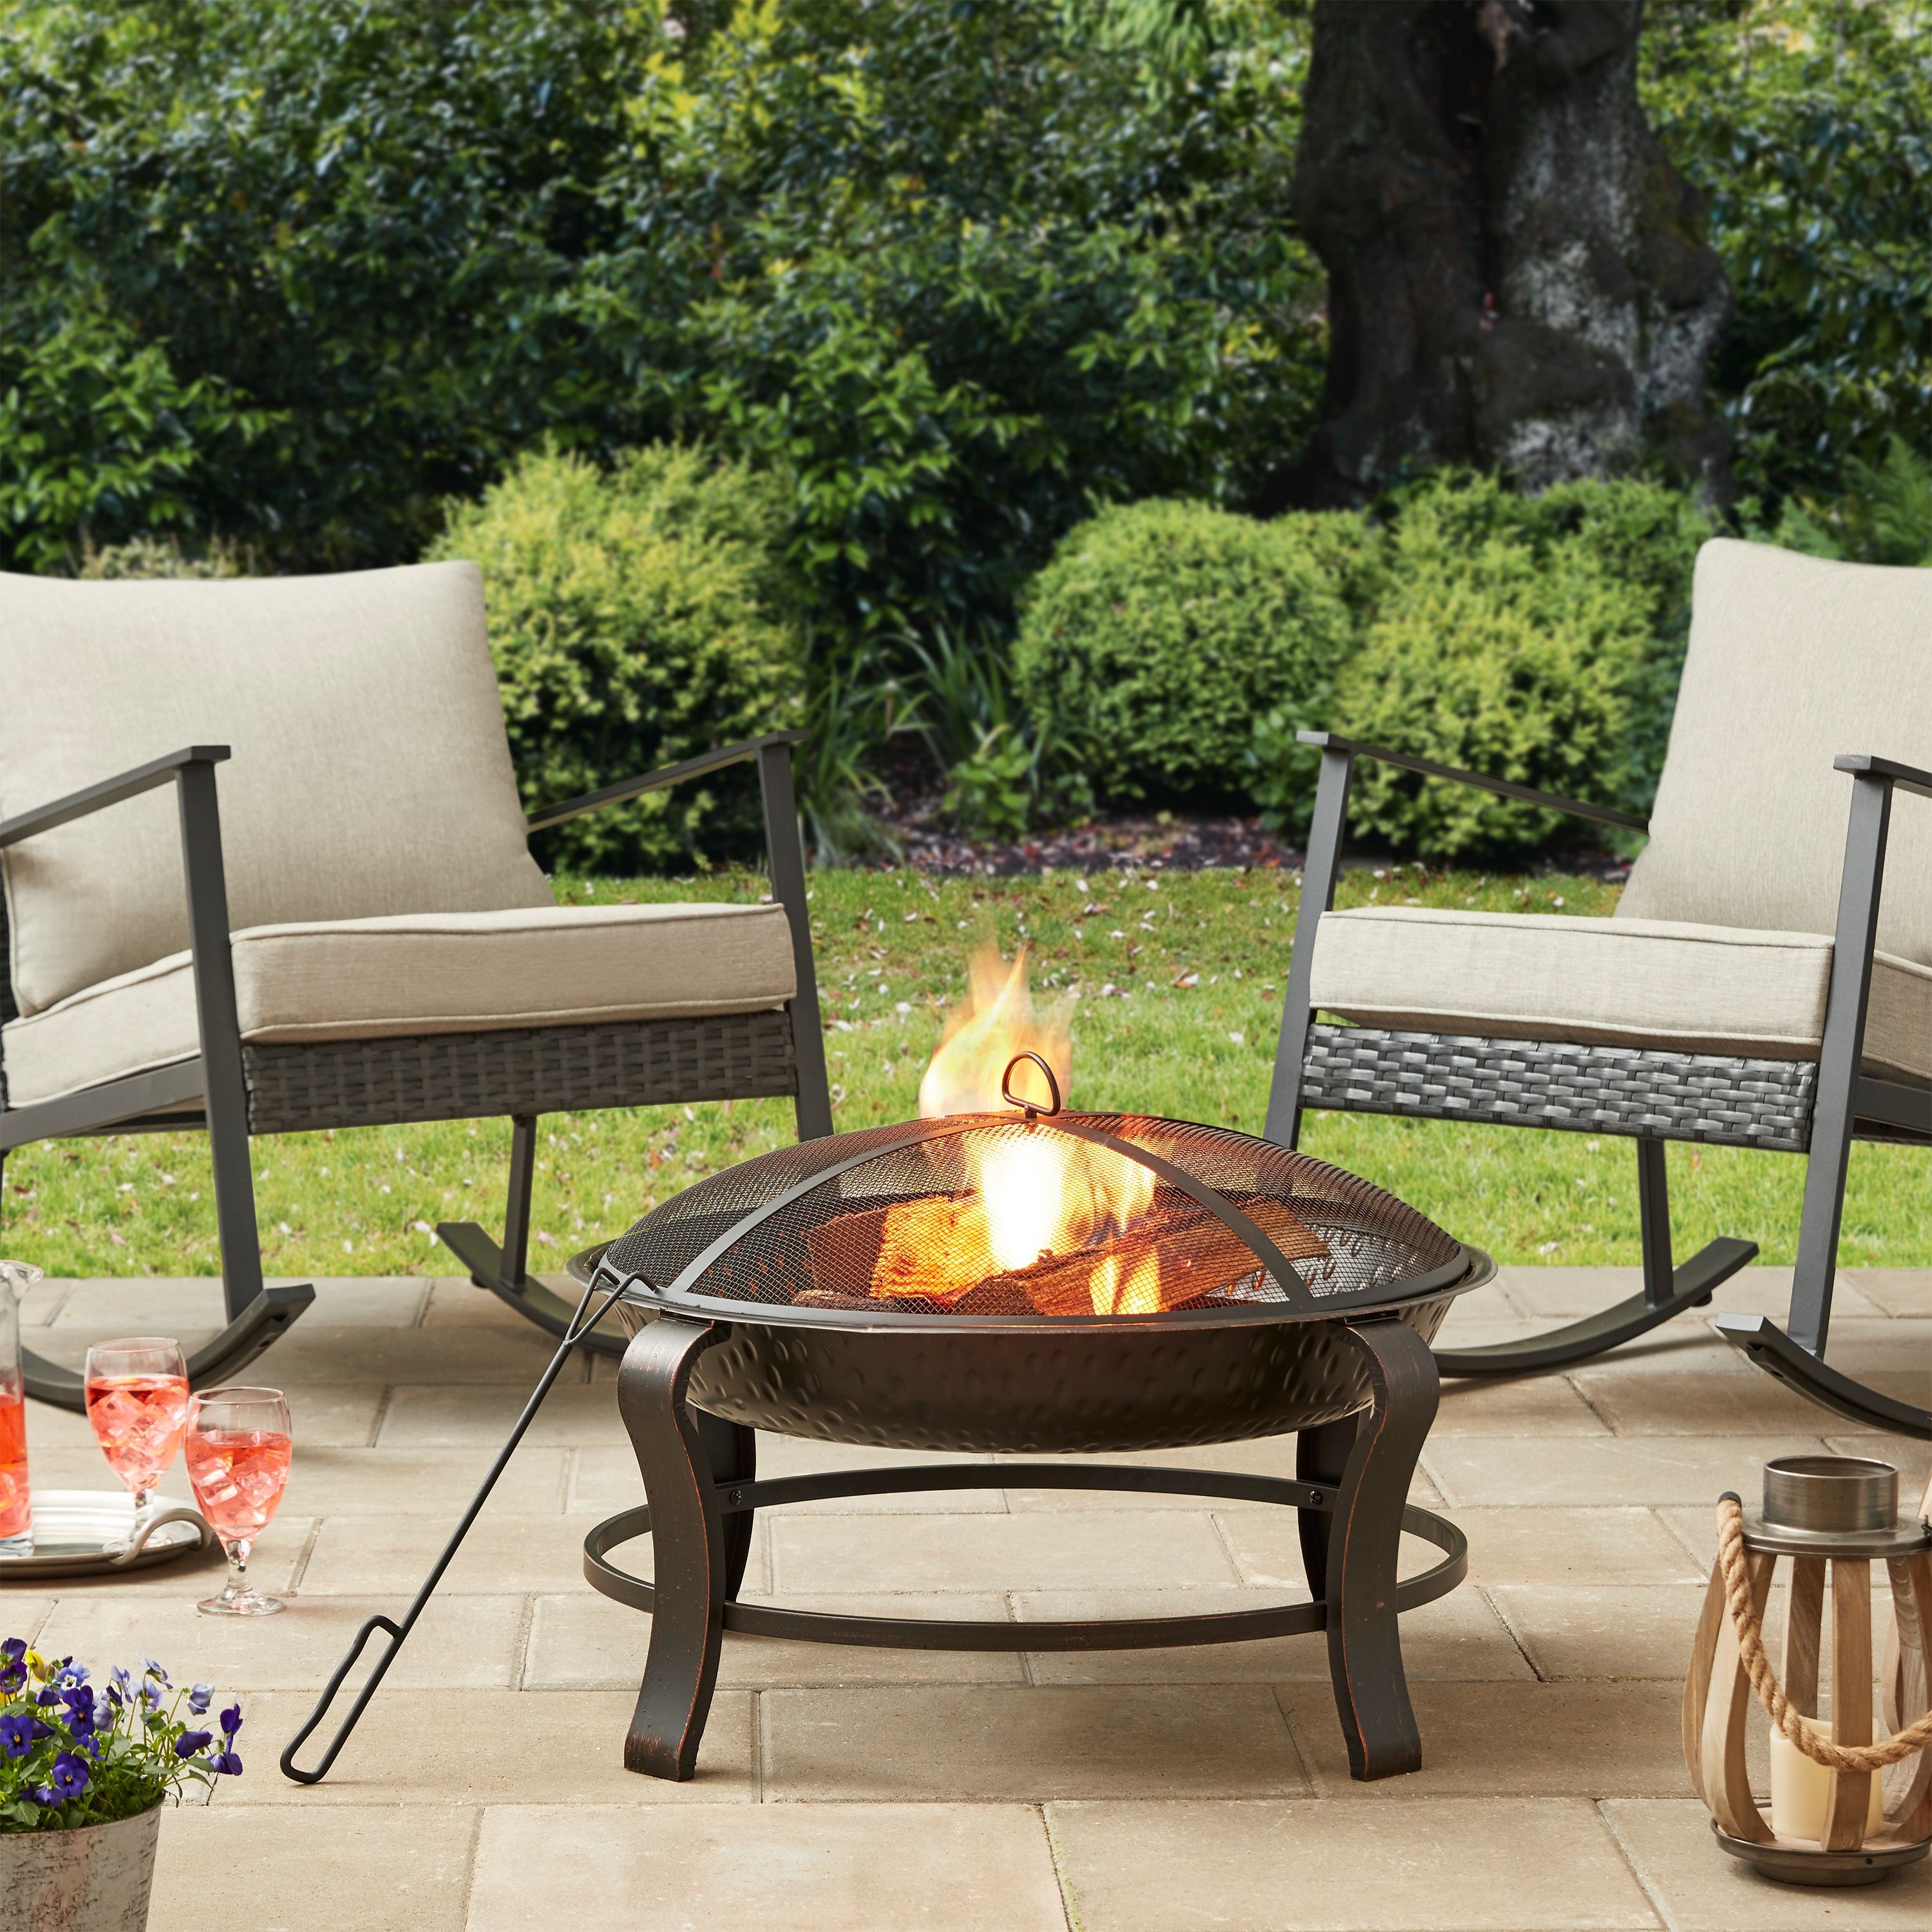 Best Wood Burning Fire Pits Where To, Sun Joe Fire Pit Replacement Parts